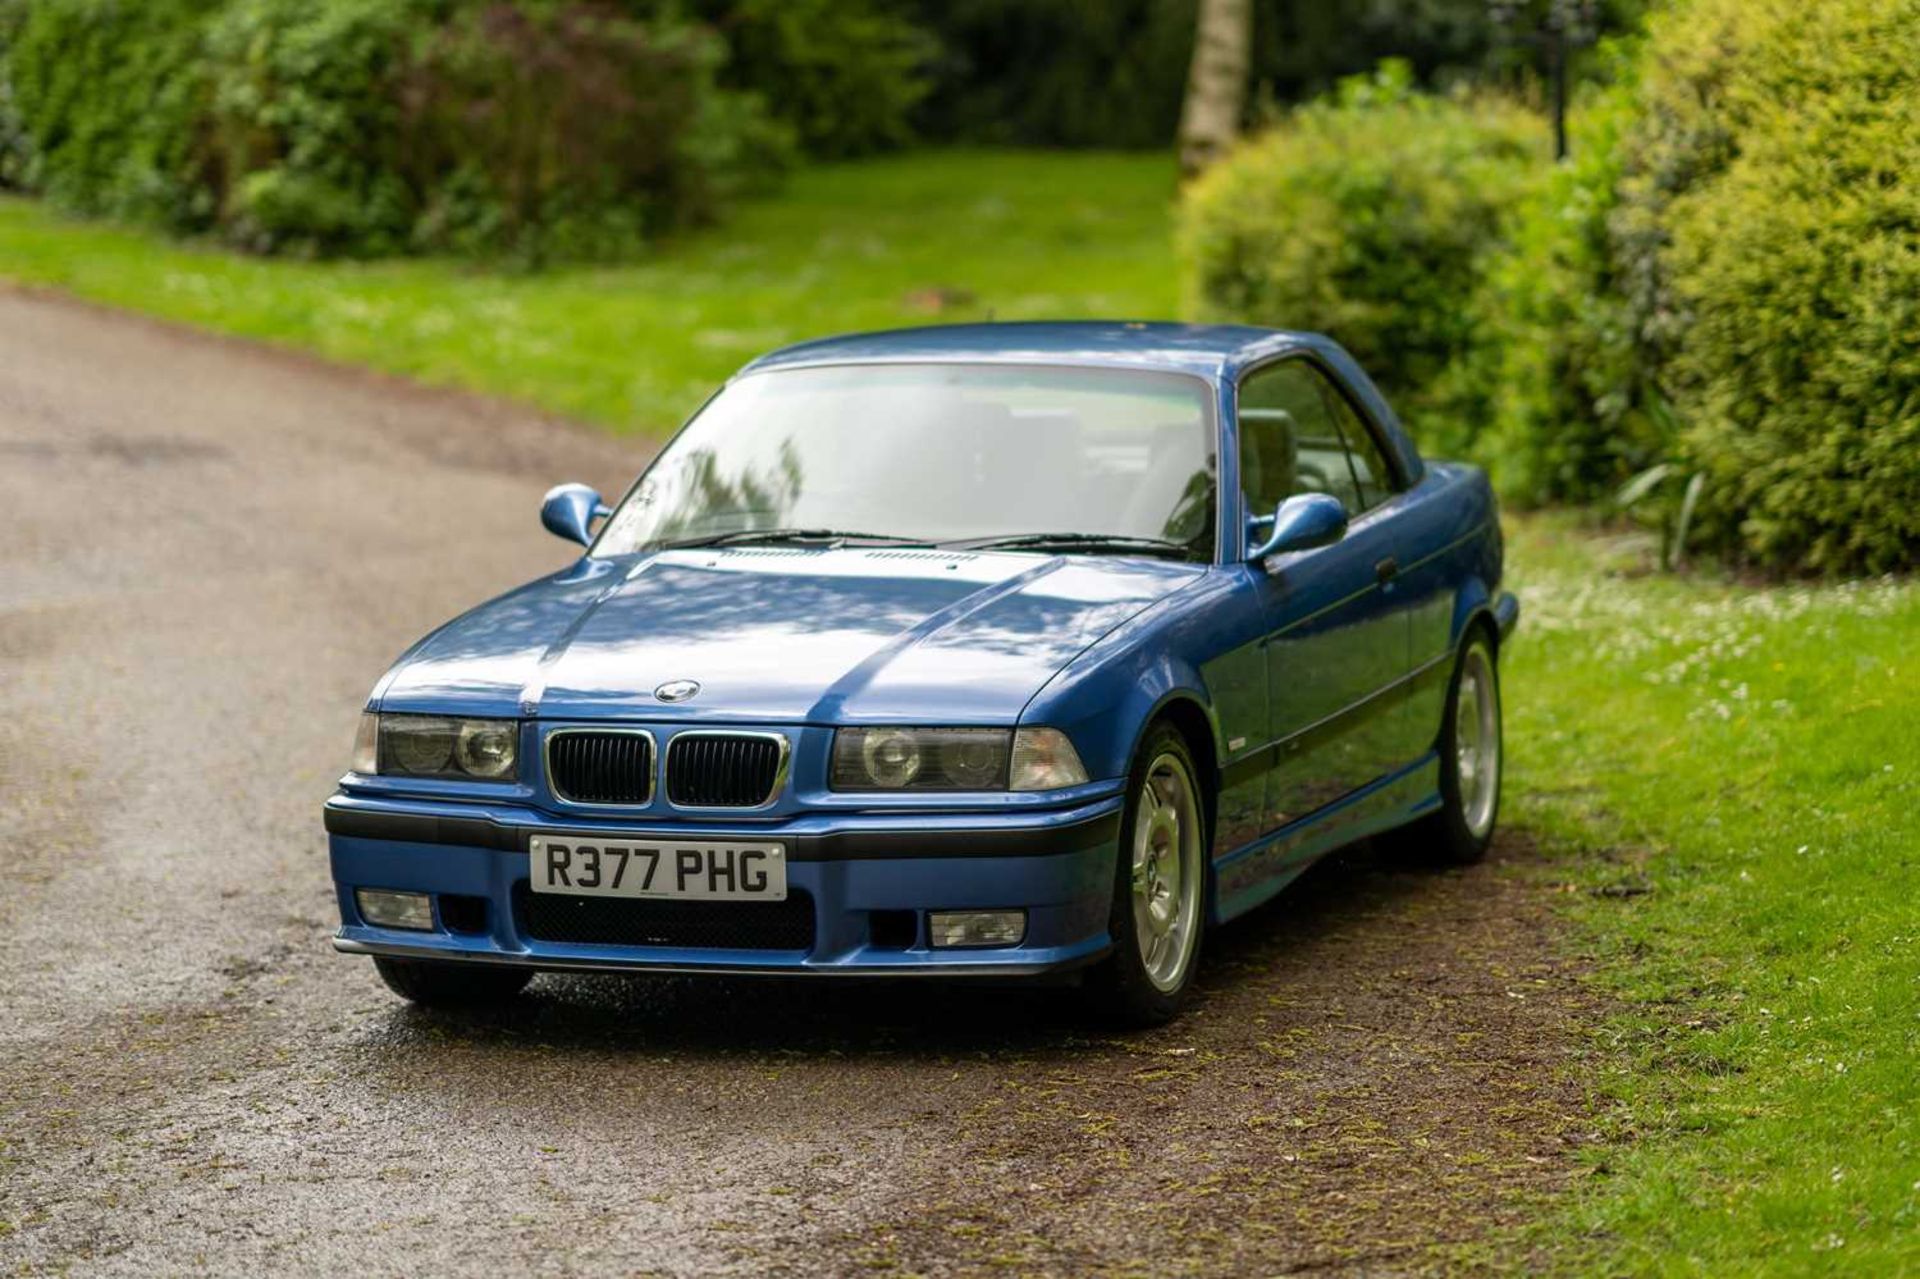 1998 BMW M3 Evolution Convertible Only 54,000 miles and full service history - Image 7 of 89